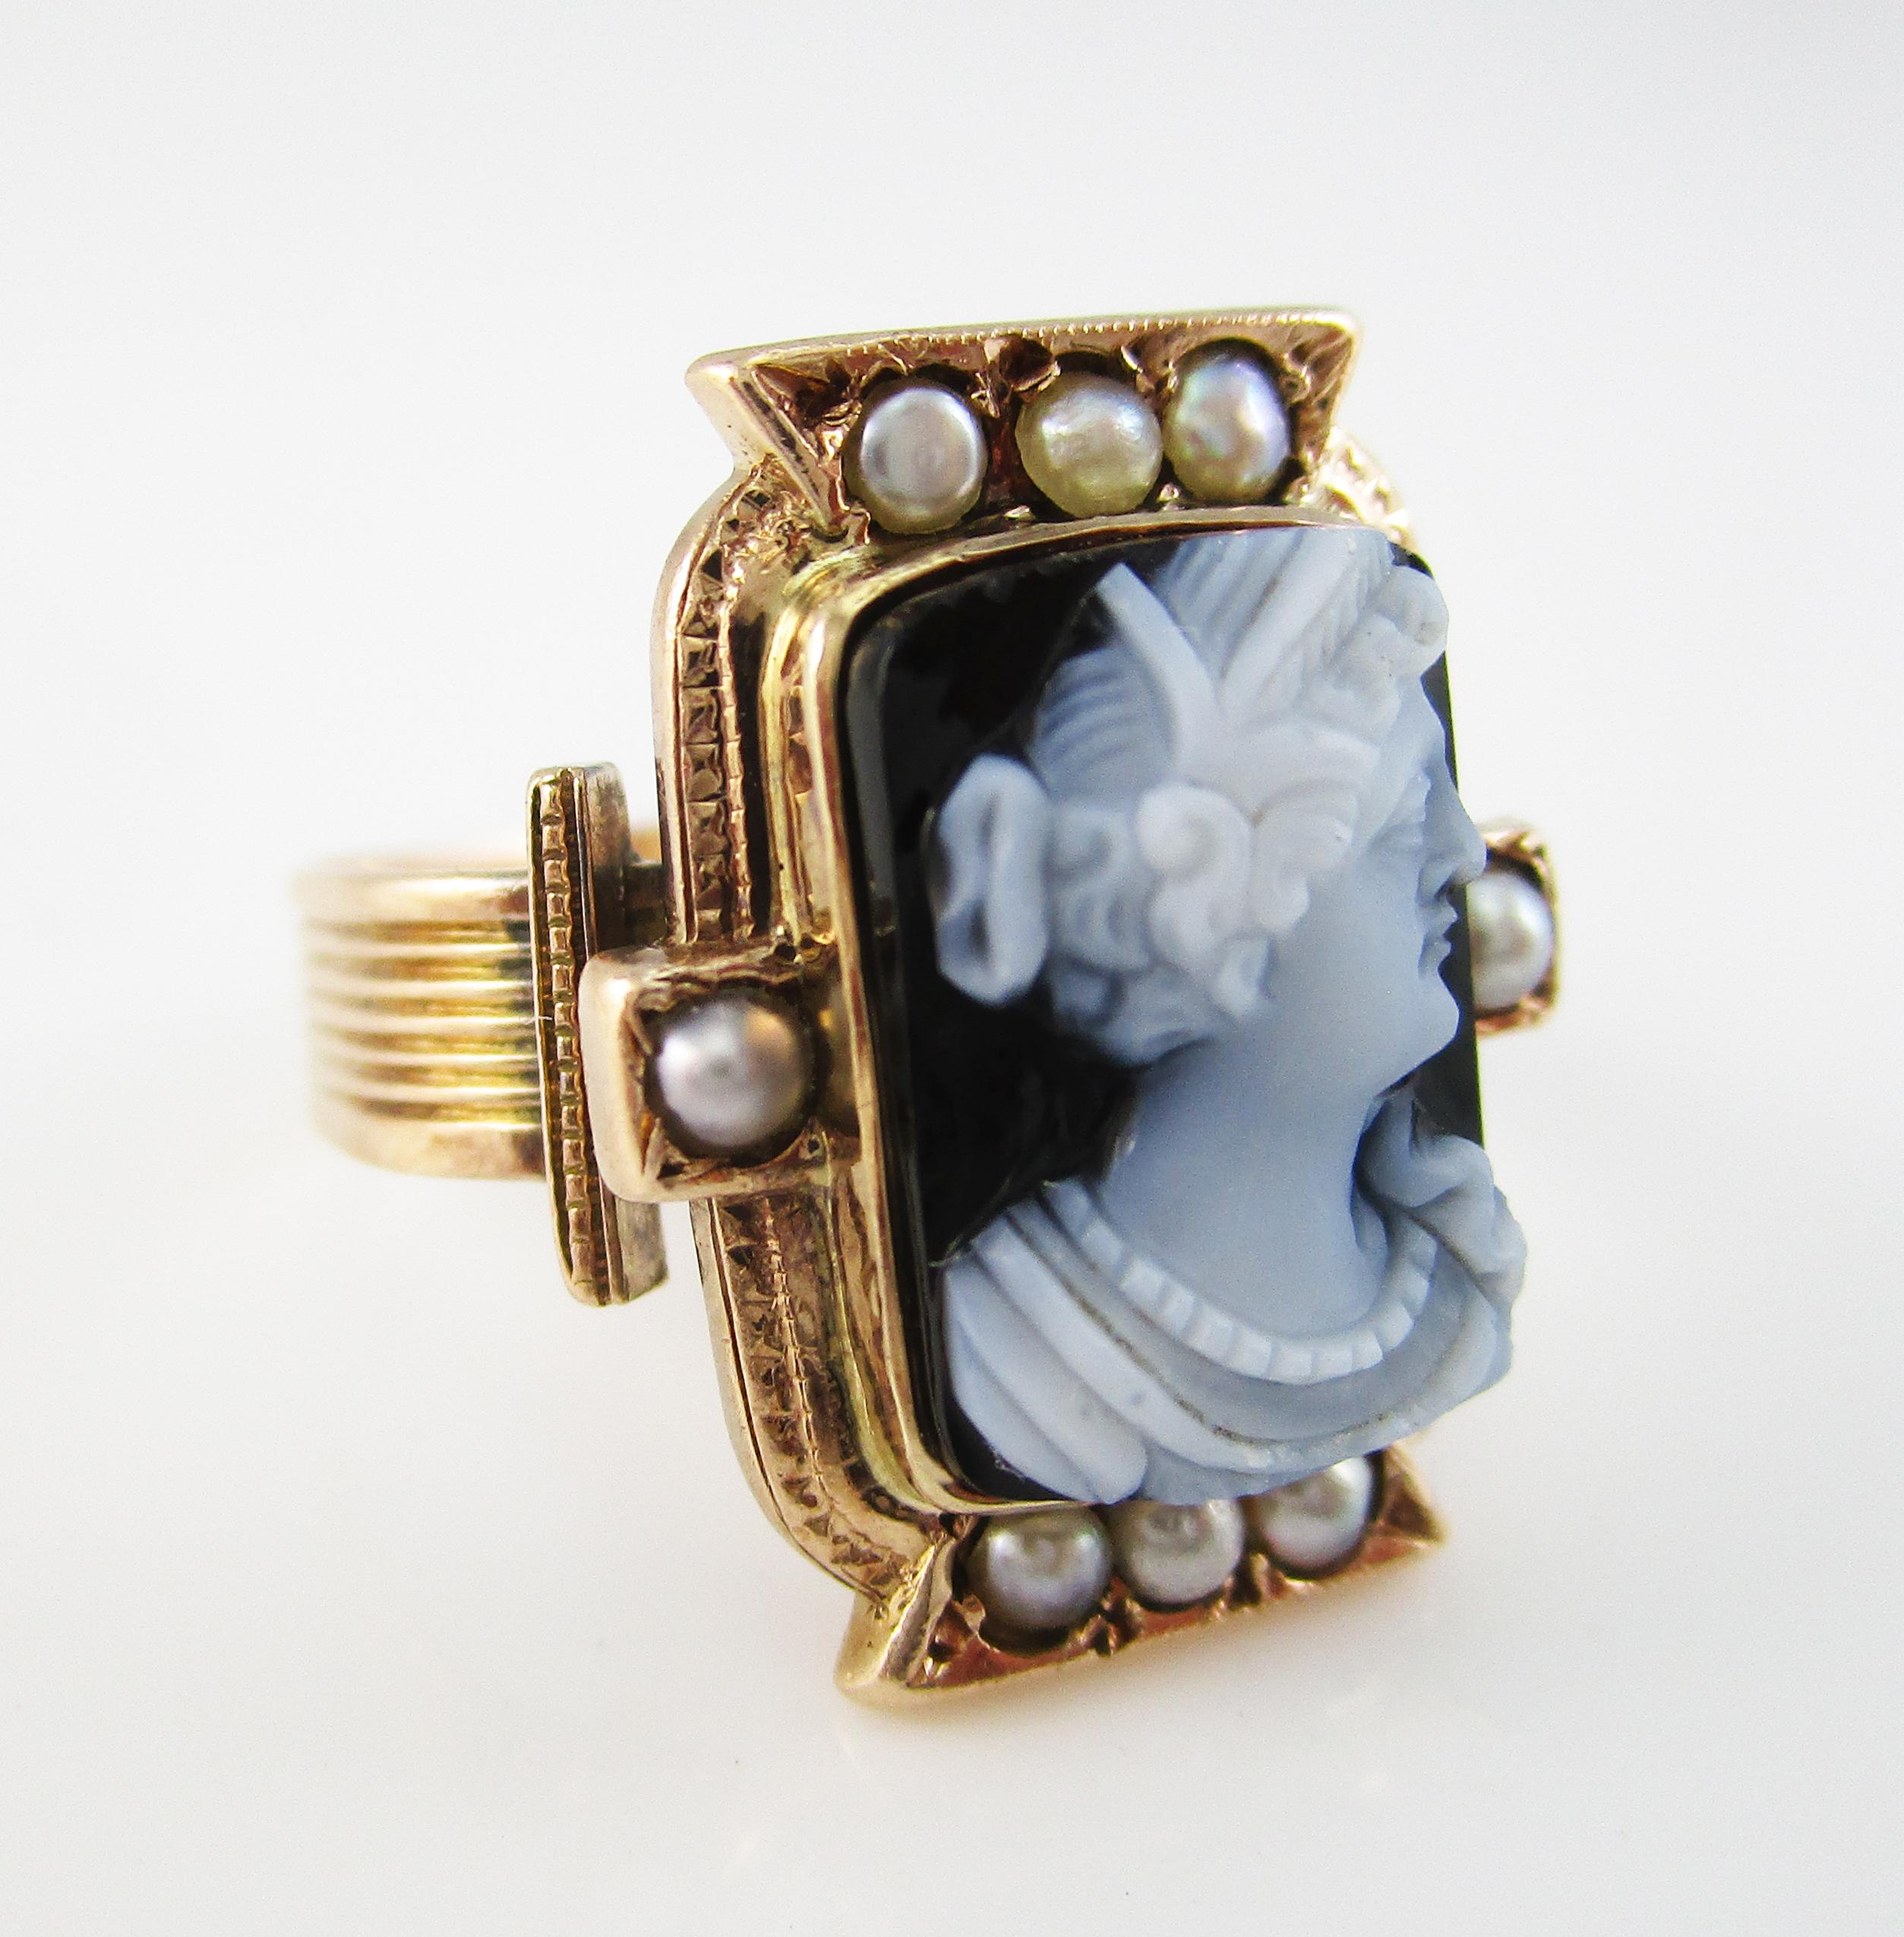 Round Cut 1870 Victorian 14 Karat Rose Gold Agate Cameo Band Ring with Pearl Border